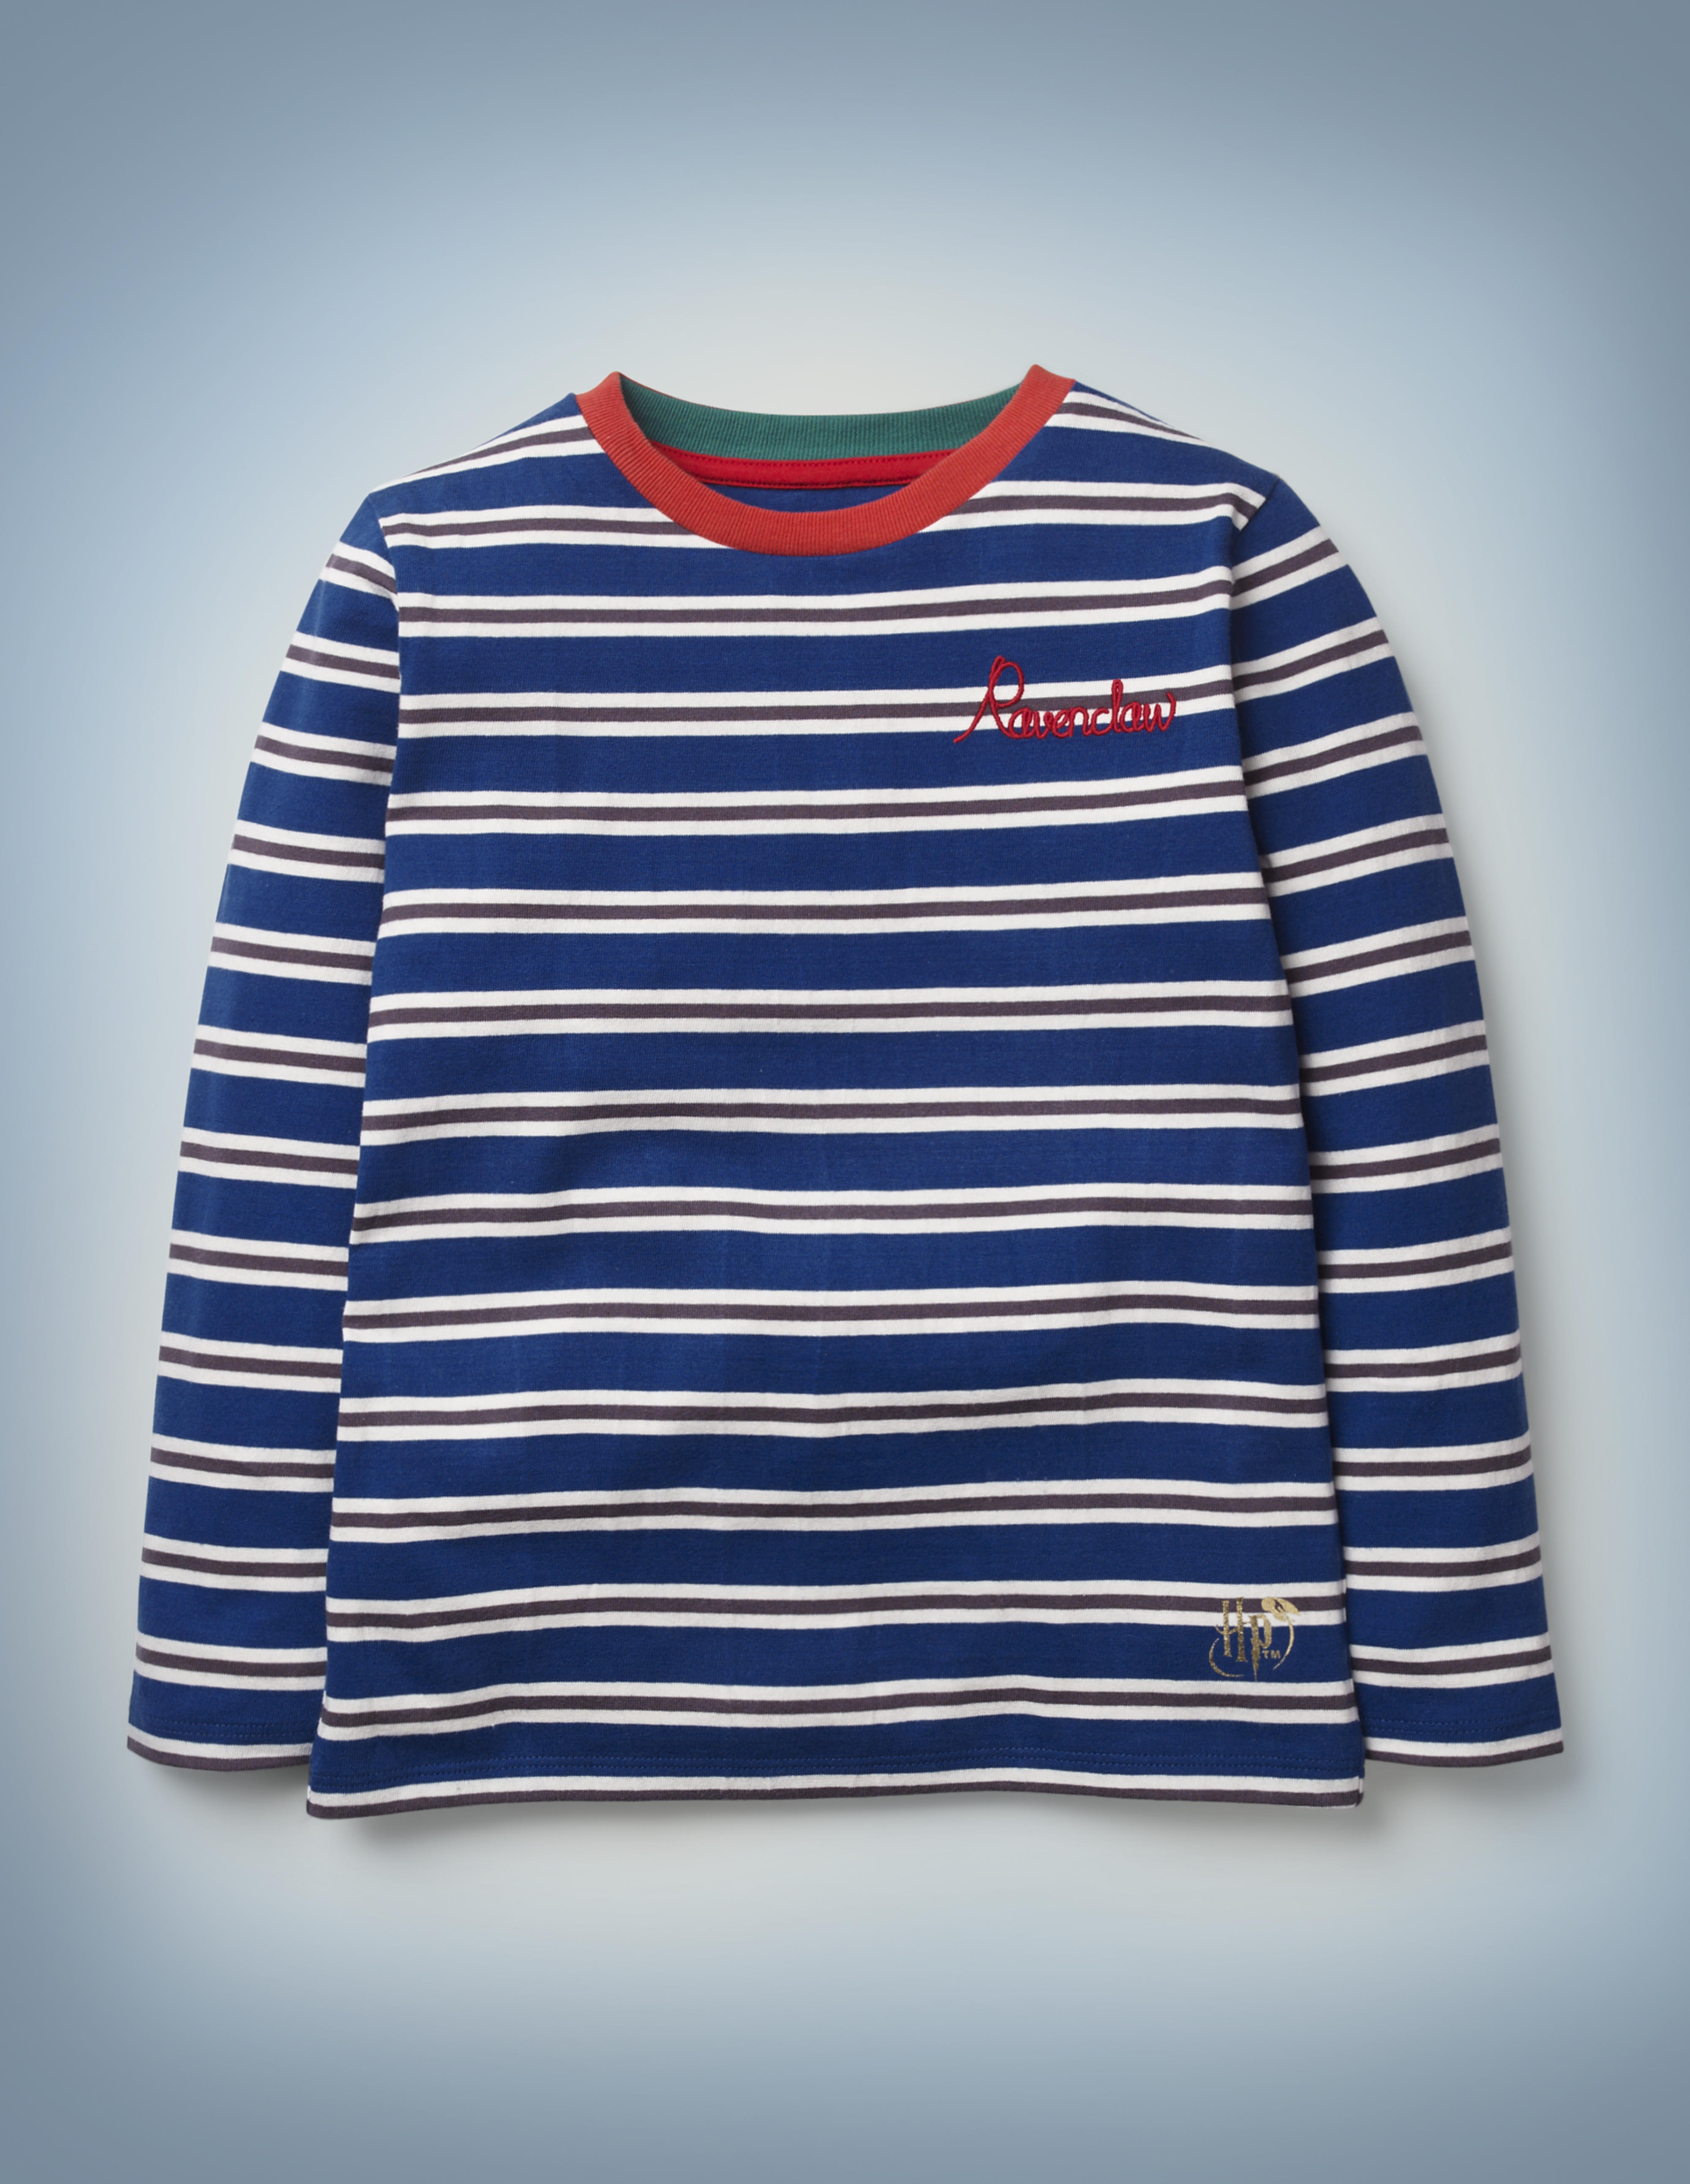 The Mini Boden House Breton in blue features all-over blue and silver stripes, a red collar, and “Ravenclaw” written in red script in the front pocket area. It retails between £20 and £22.